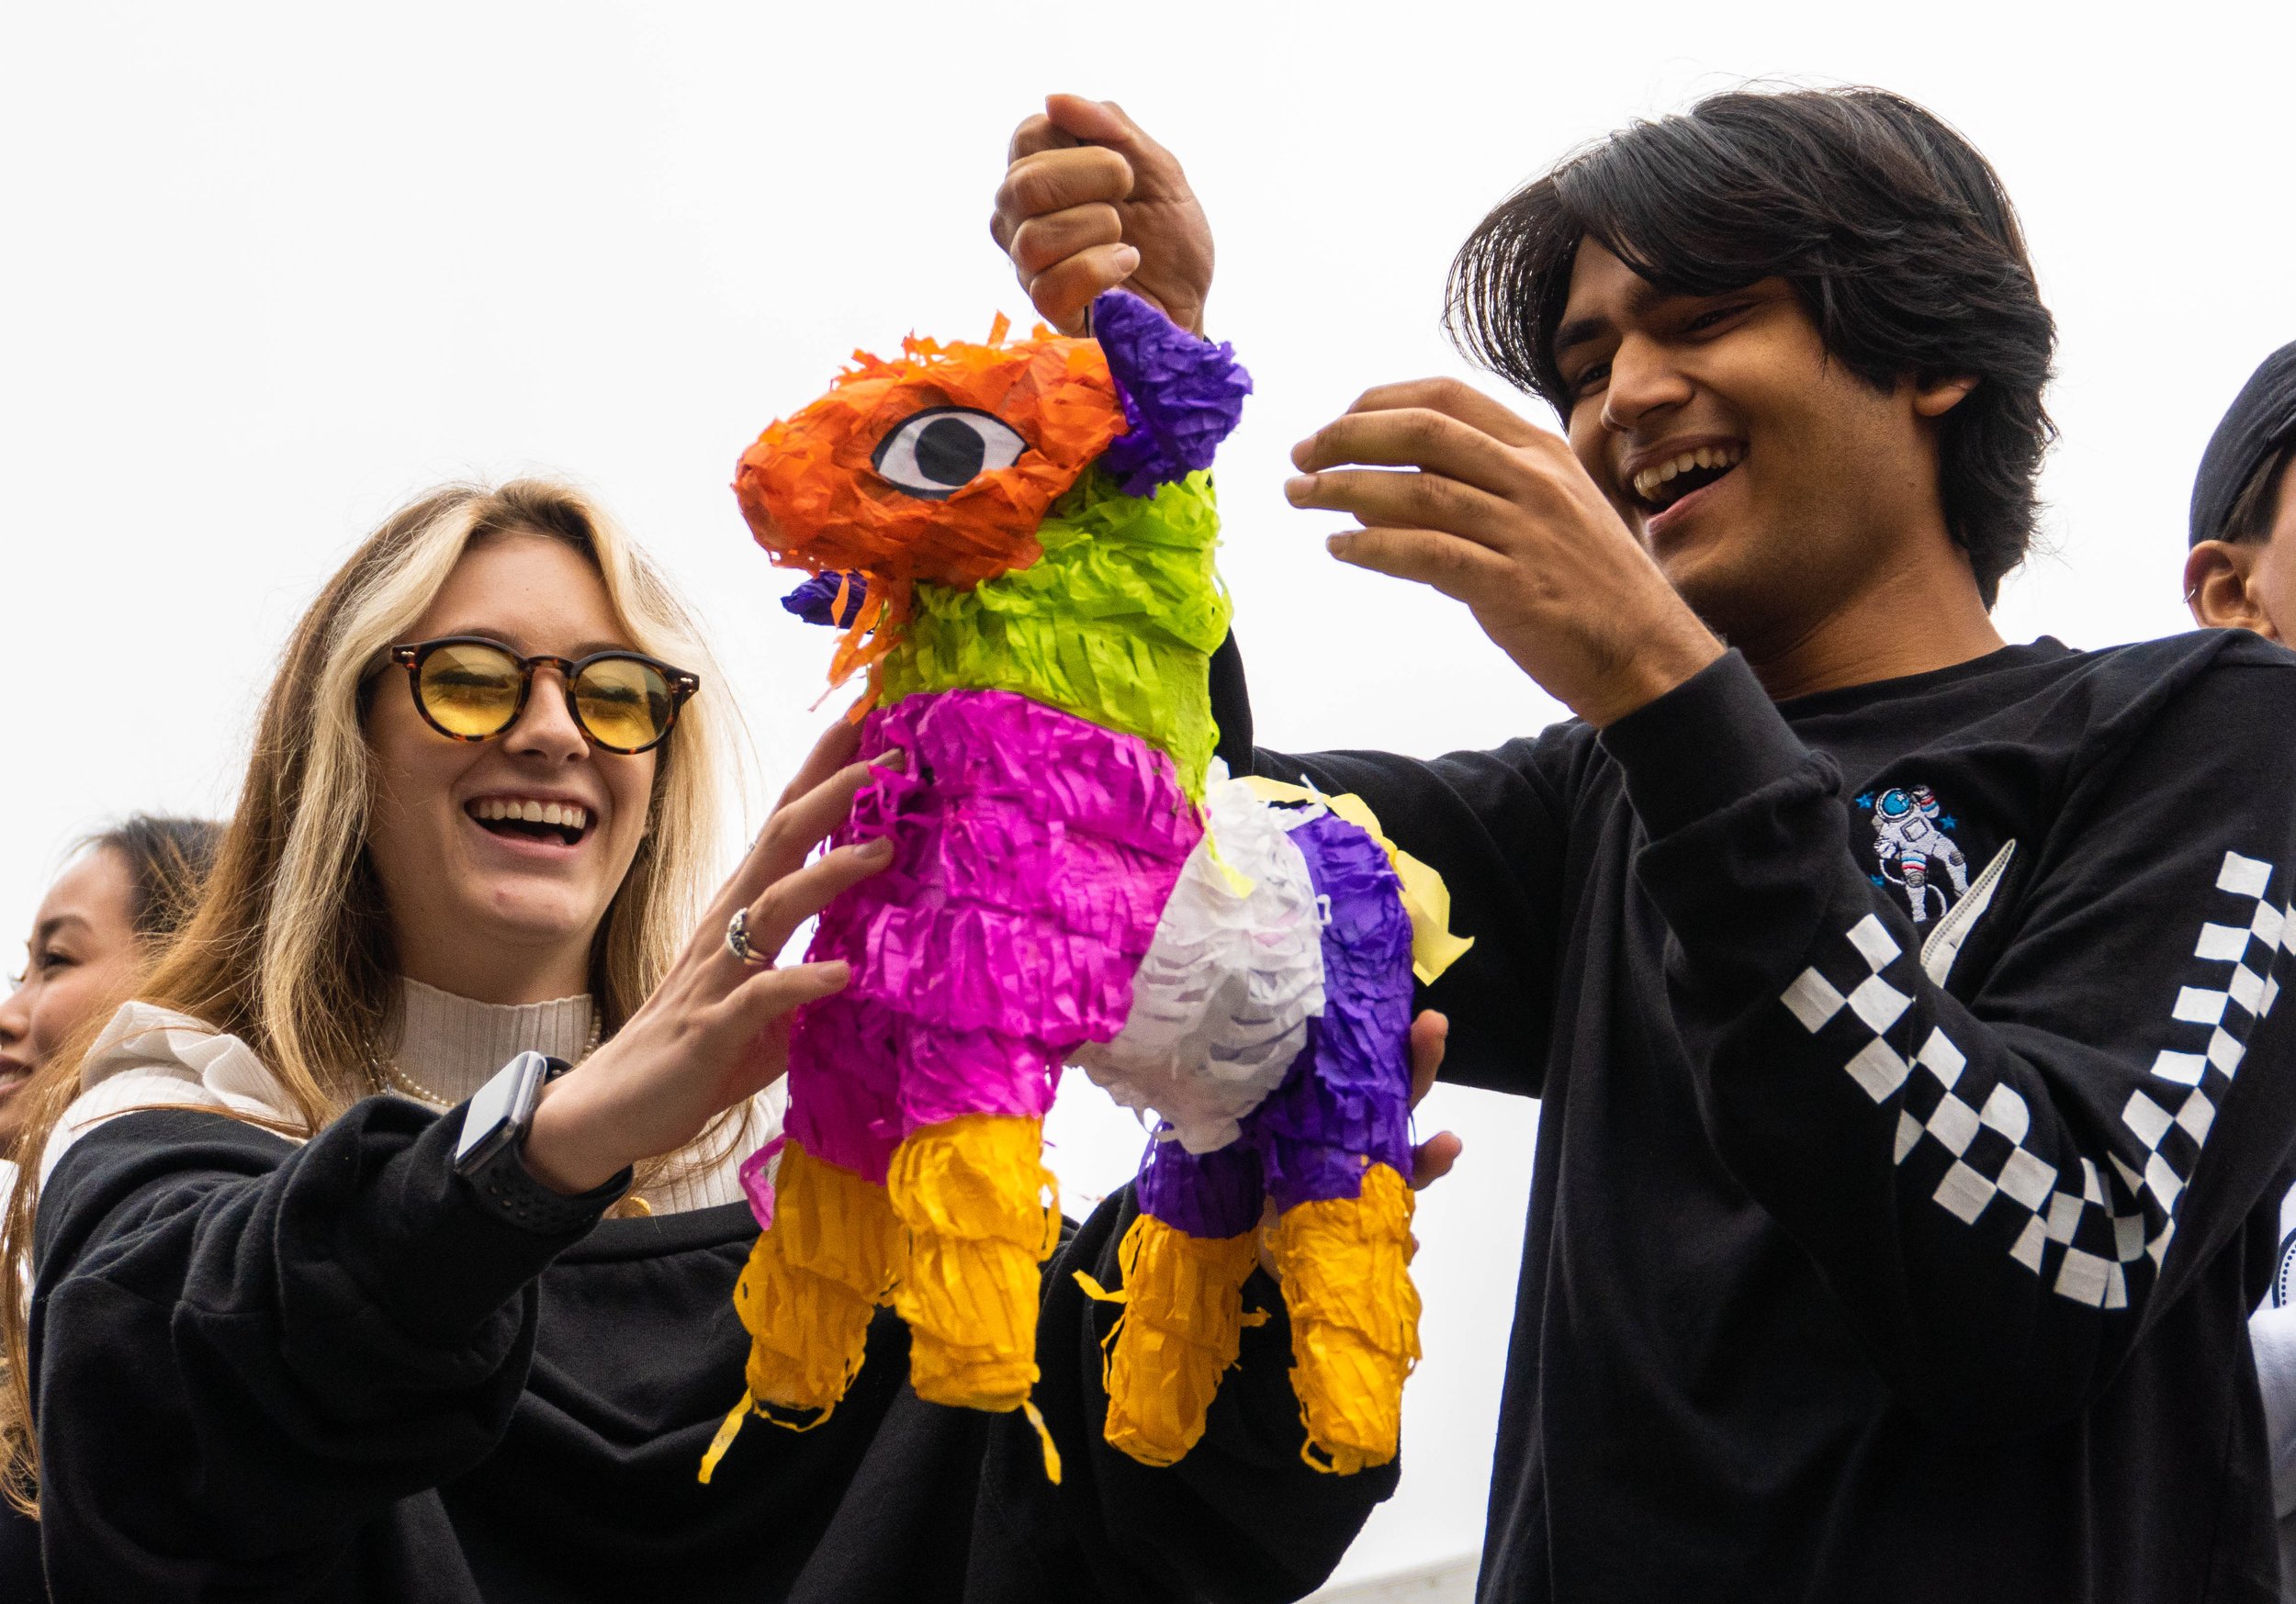  (L-R) Andrea Giraldo and Sharar Chowdhury, the Club Delegate of the Santa Monica College International Student Forum (ISF) examine a piñata, brought in by a student from Mexico during the ISF's Snacks Appreication Day. Oct. 5, 2022. Santa Monica, Ca